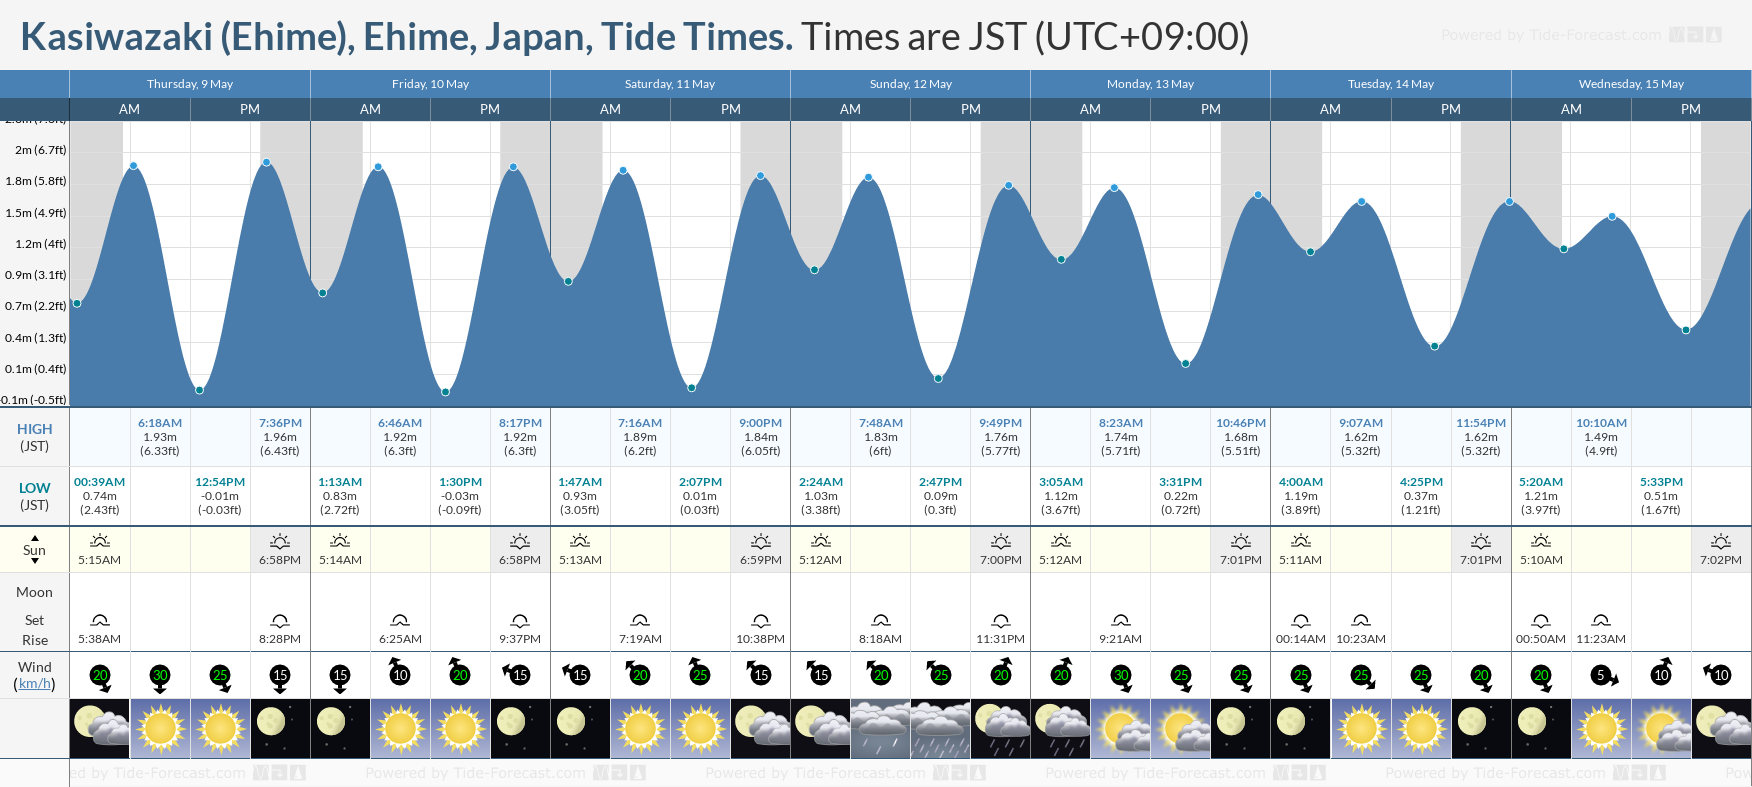 Kasiwazaki (Ehime), Ehime, Japan Tide Chart including high and low tide tide times for the next 7 days